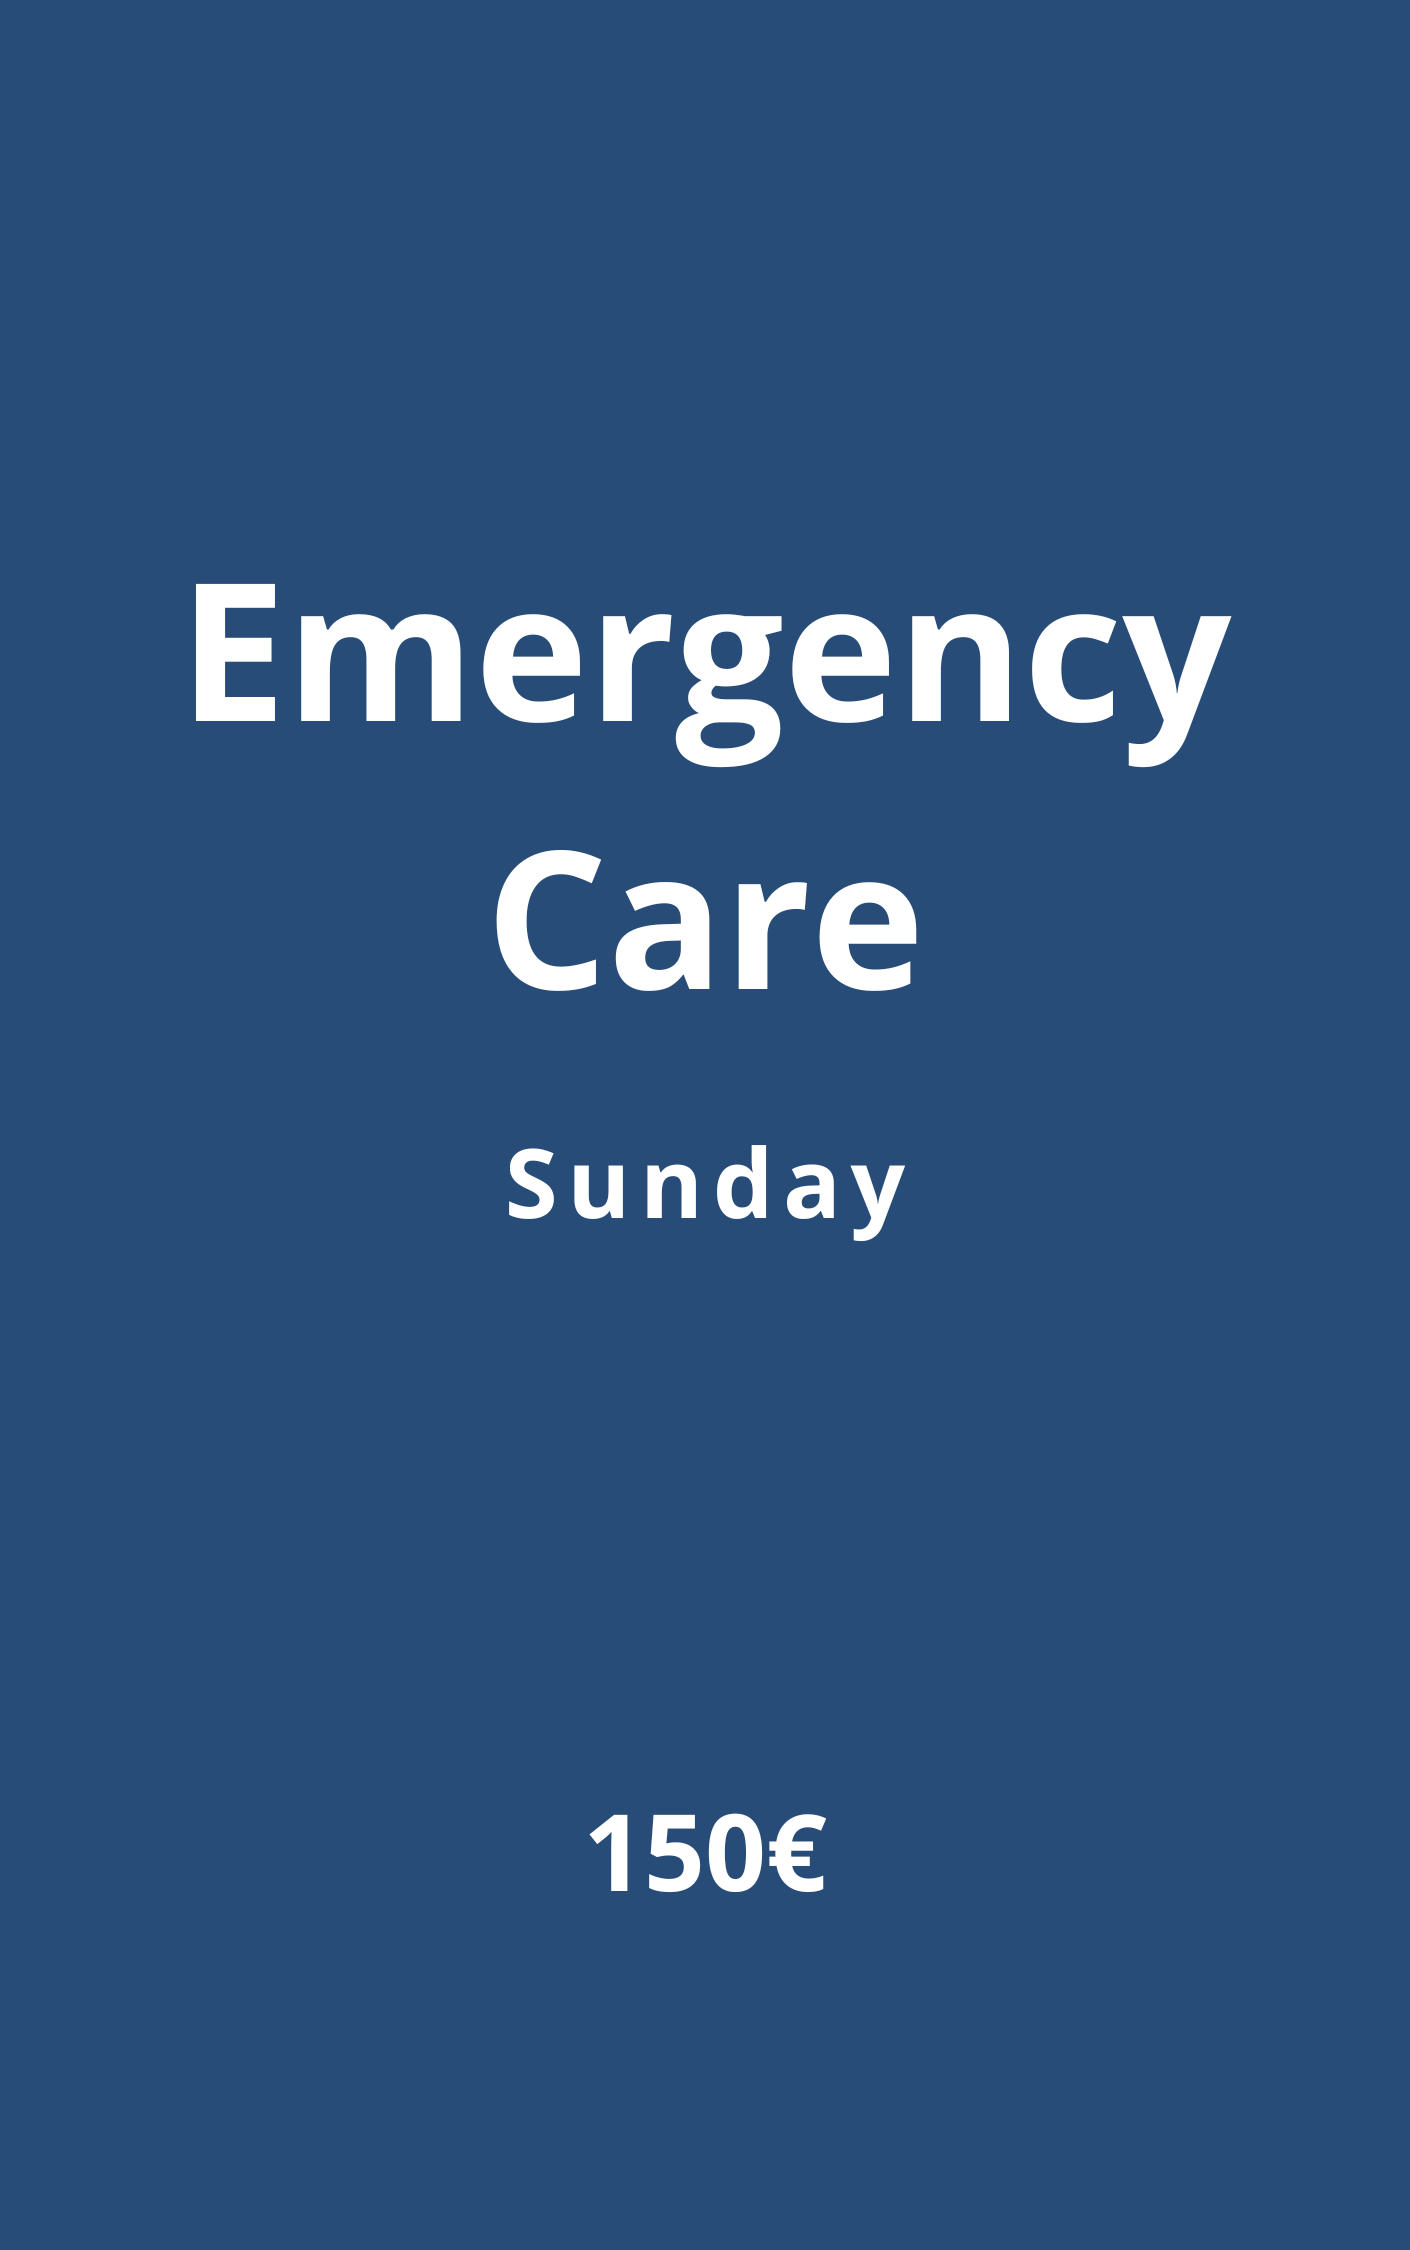 Professional osteopath on-call for emergency sessions on Sundays